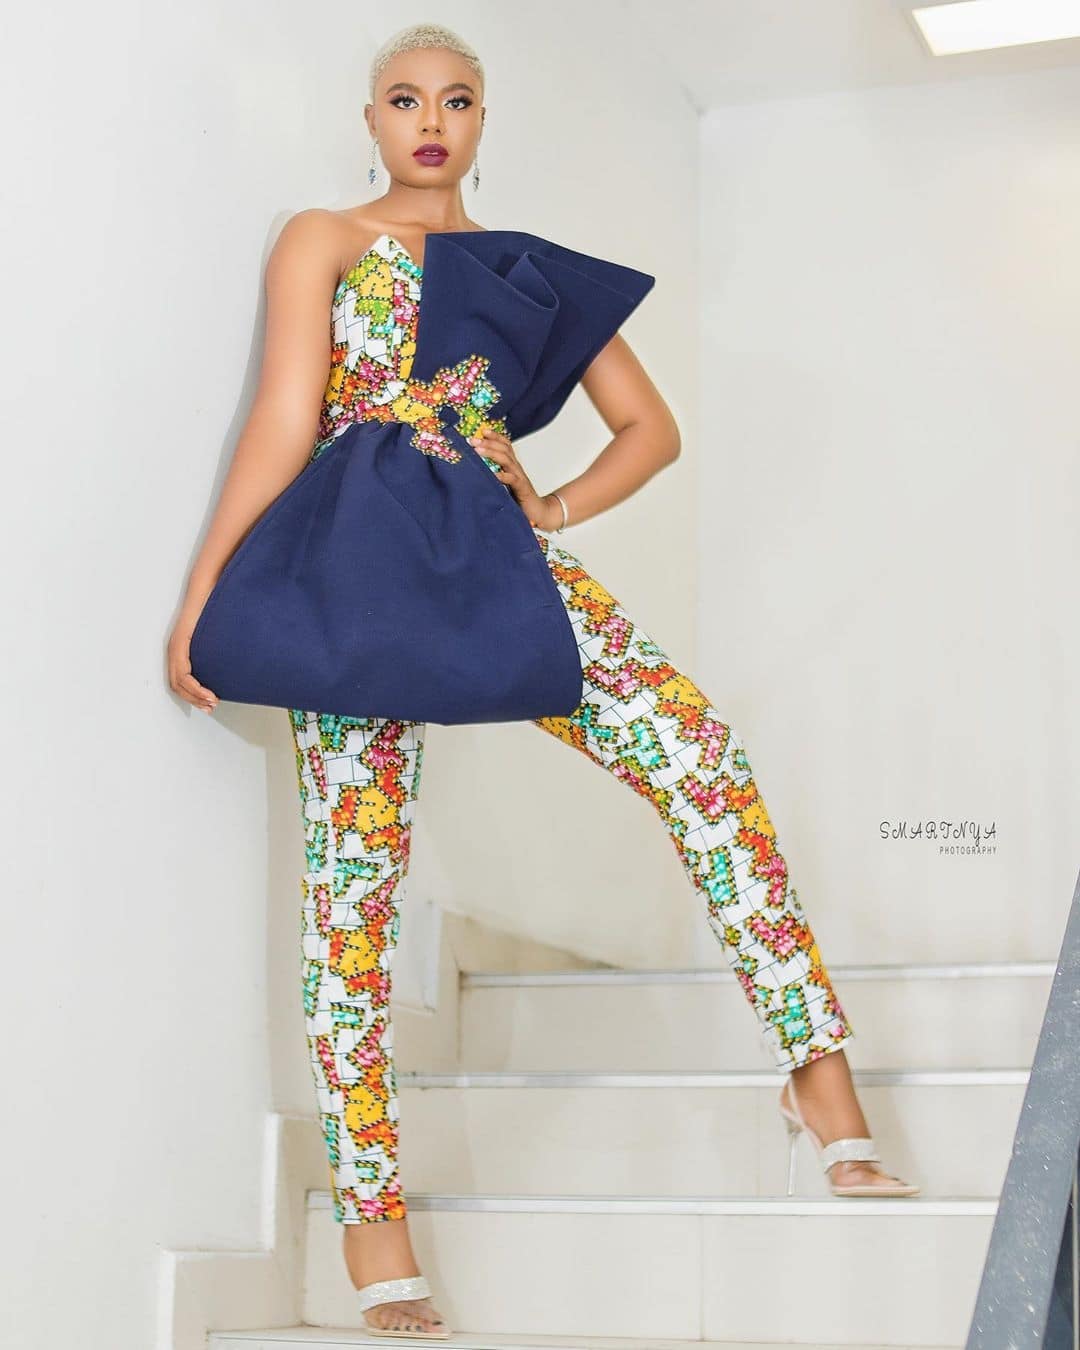 nancy-isime-the-most-rave-worthy-looks-on-women-across-africa-african-celebrity-fashion-october-5th